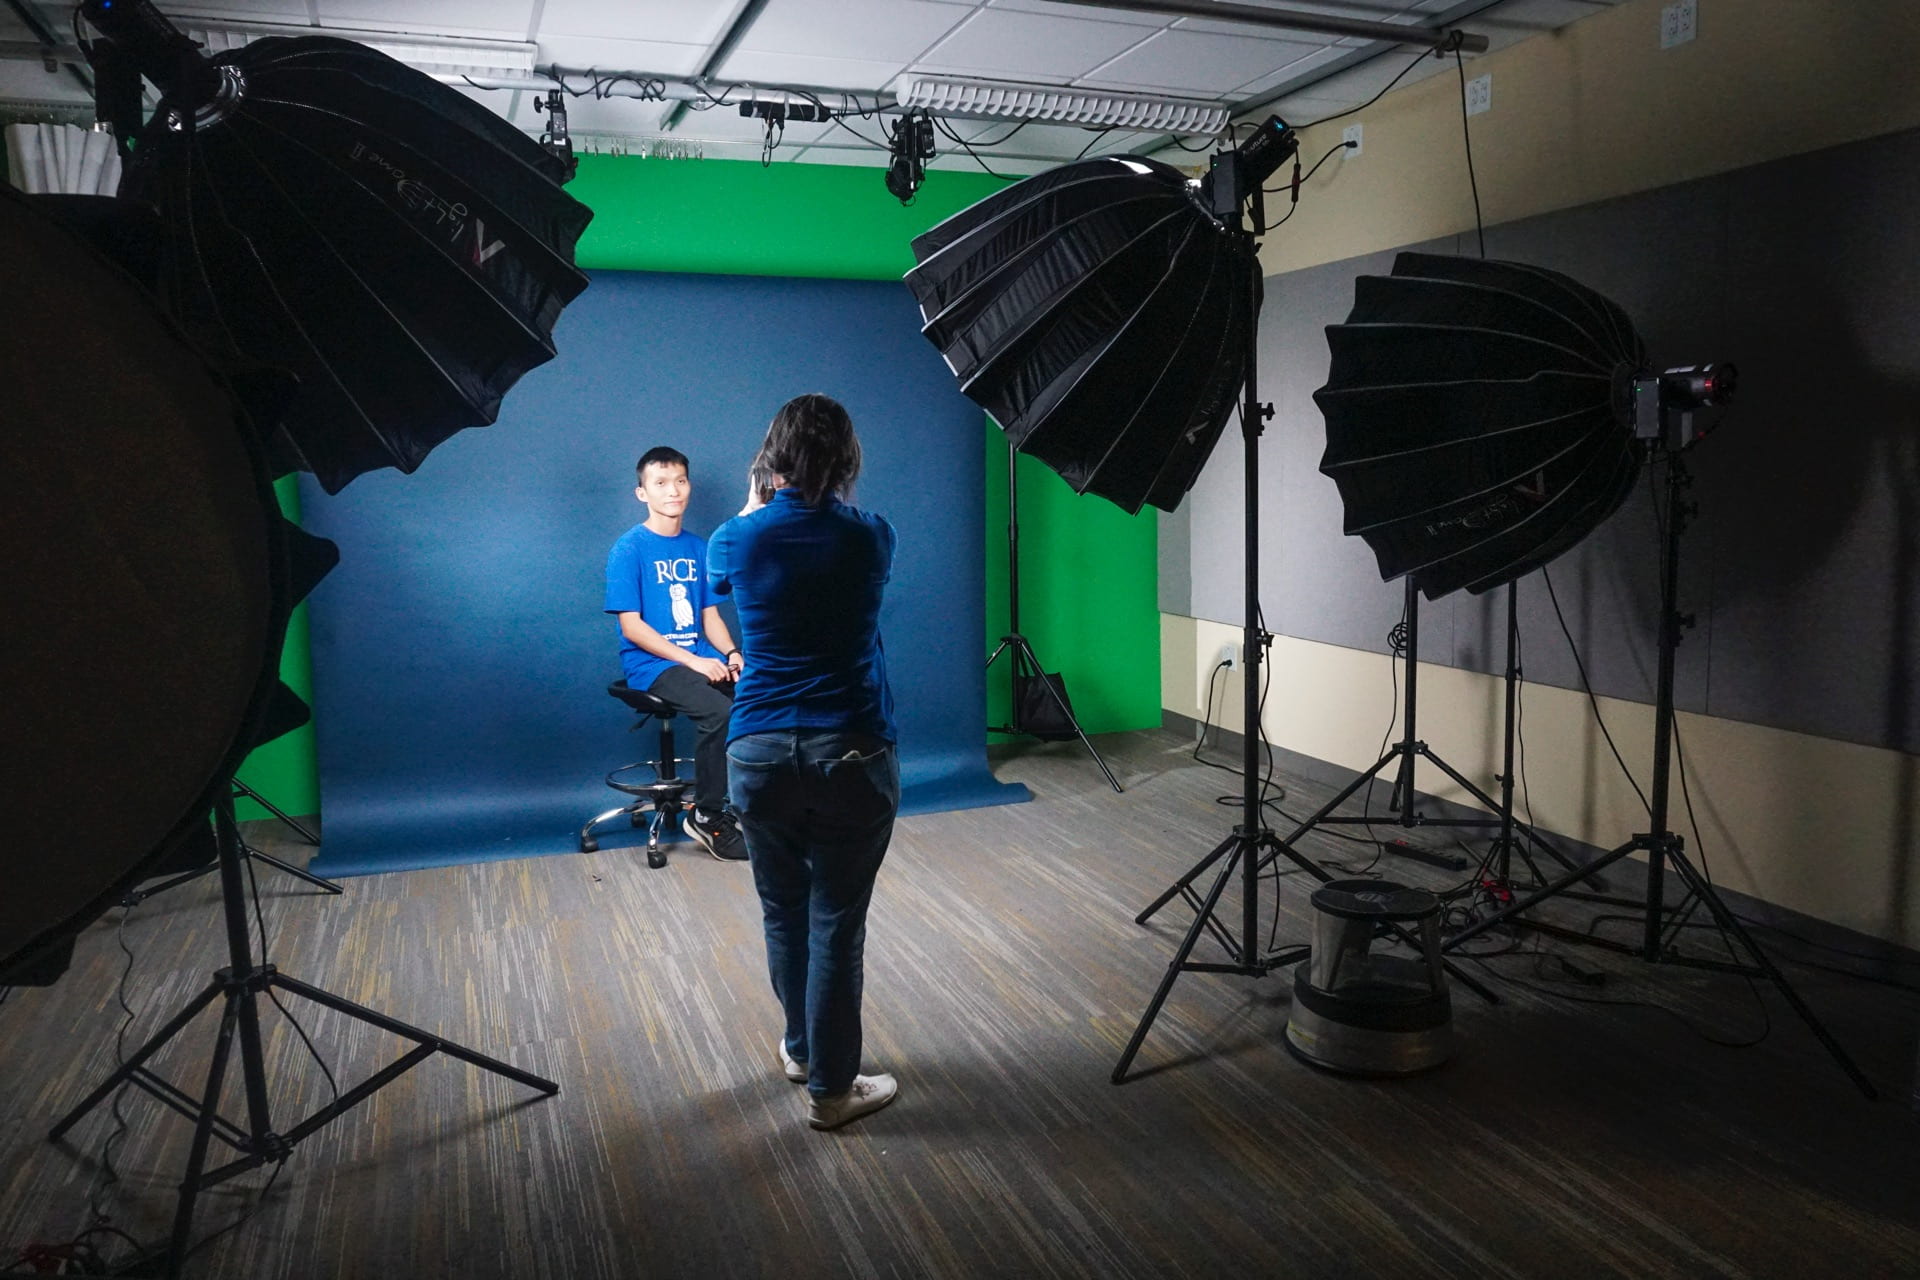 Student being photographed in a lighting studio